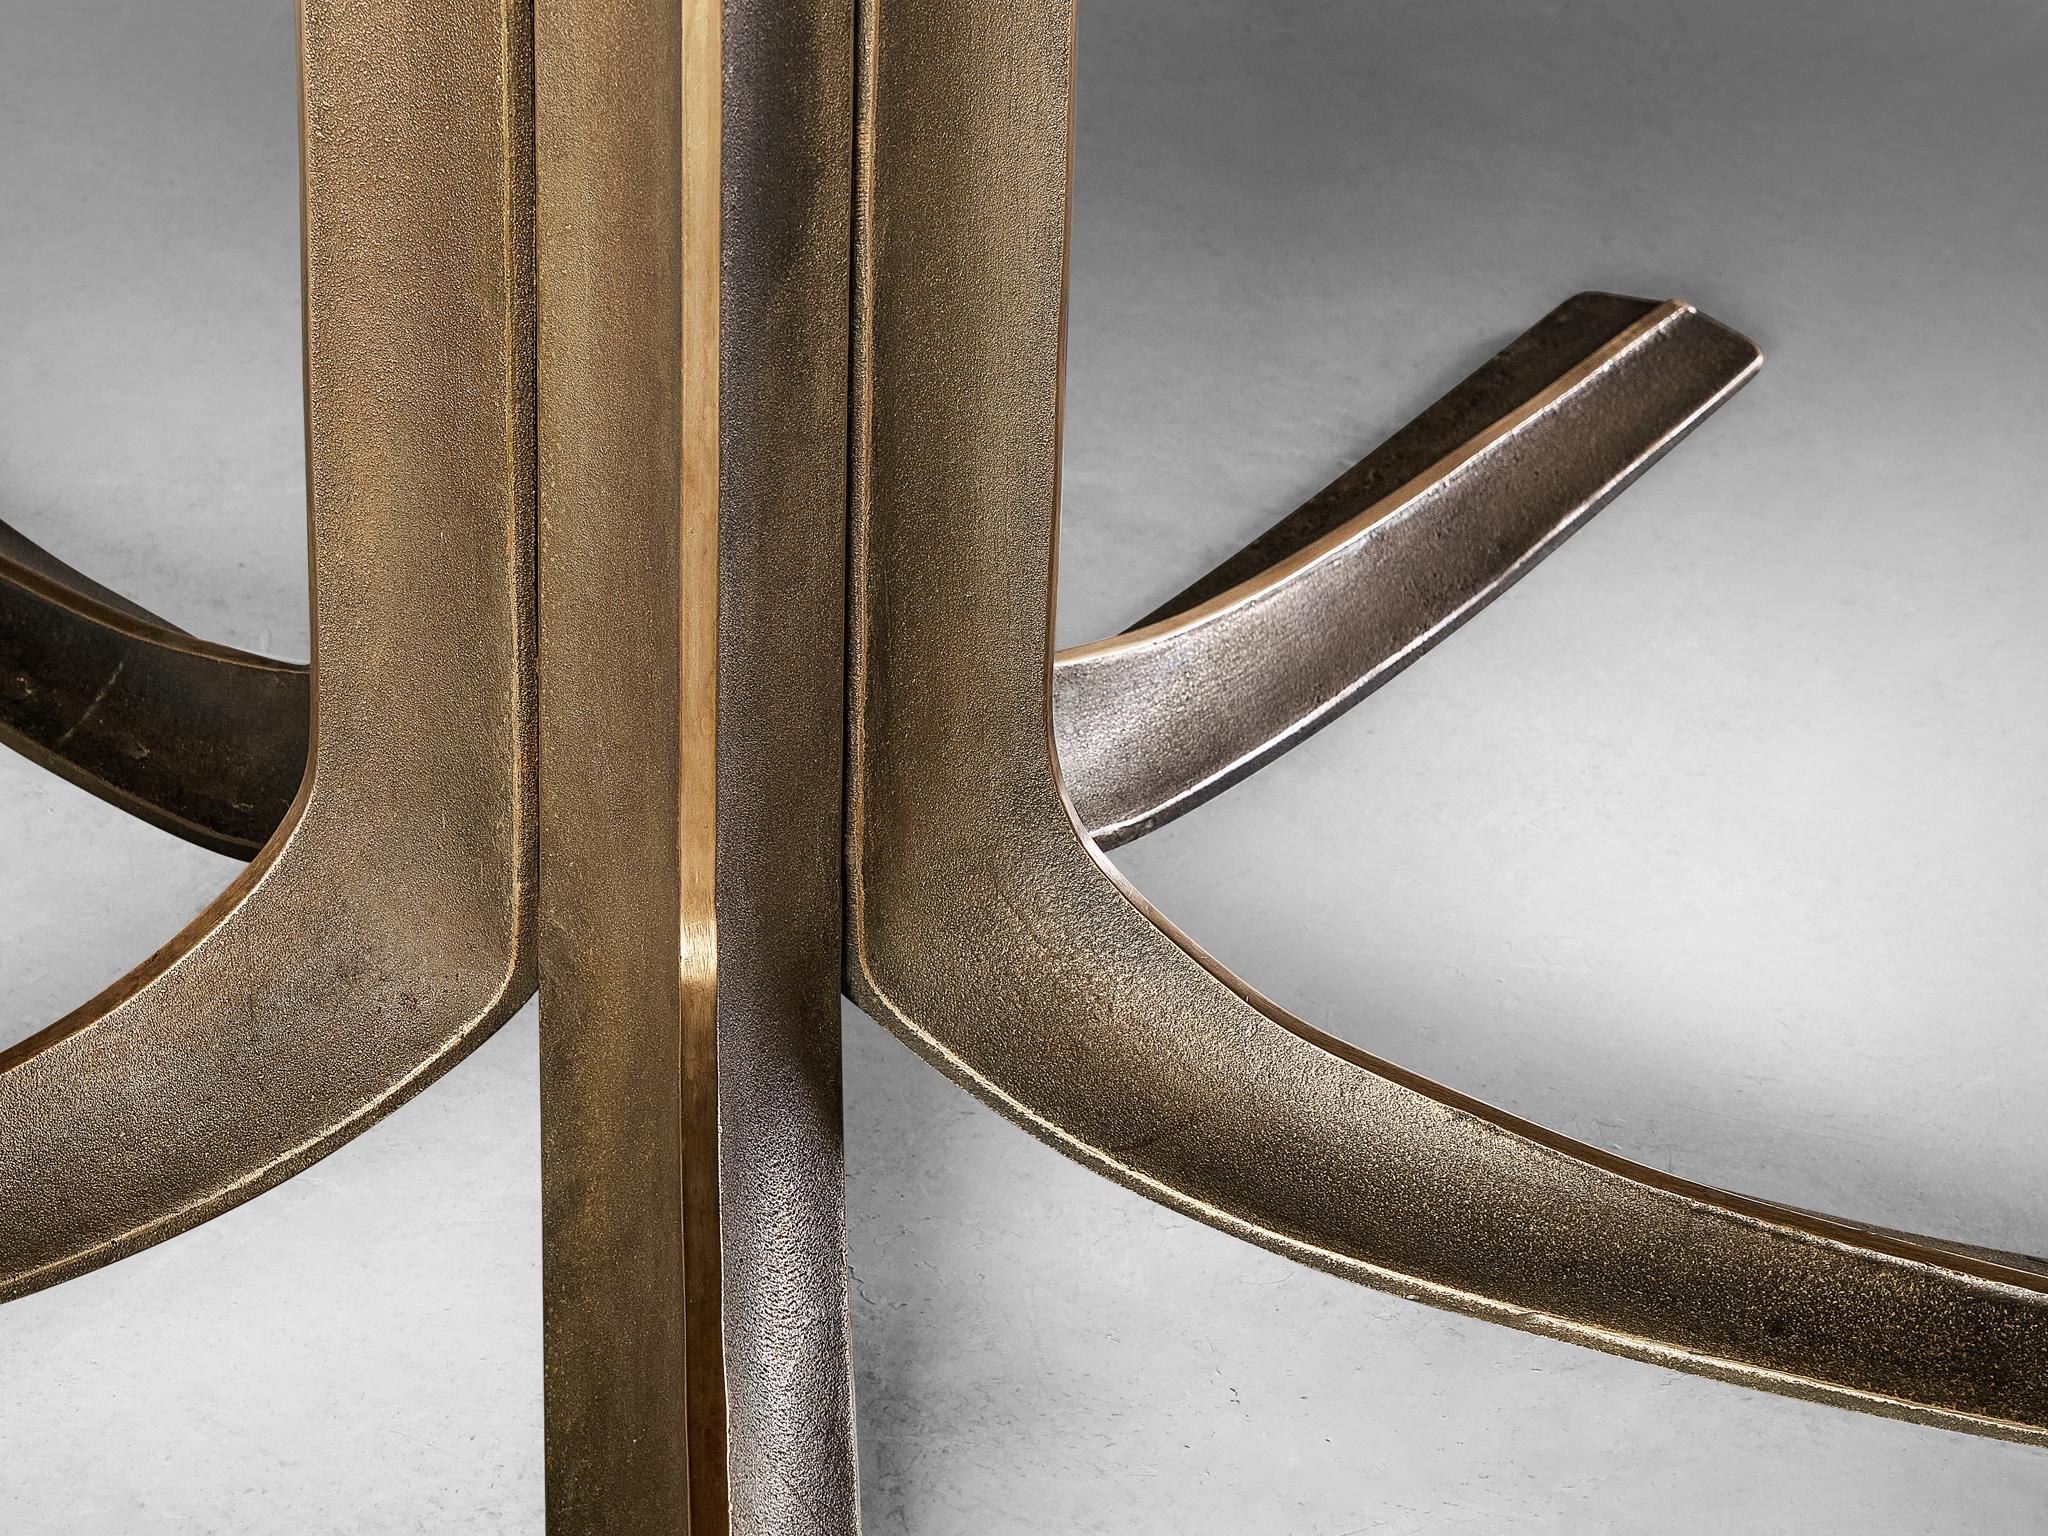 Jules Wabbes Center Table with Tulip Base in Wengé and Bronze